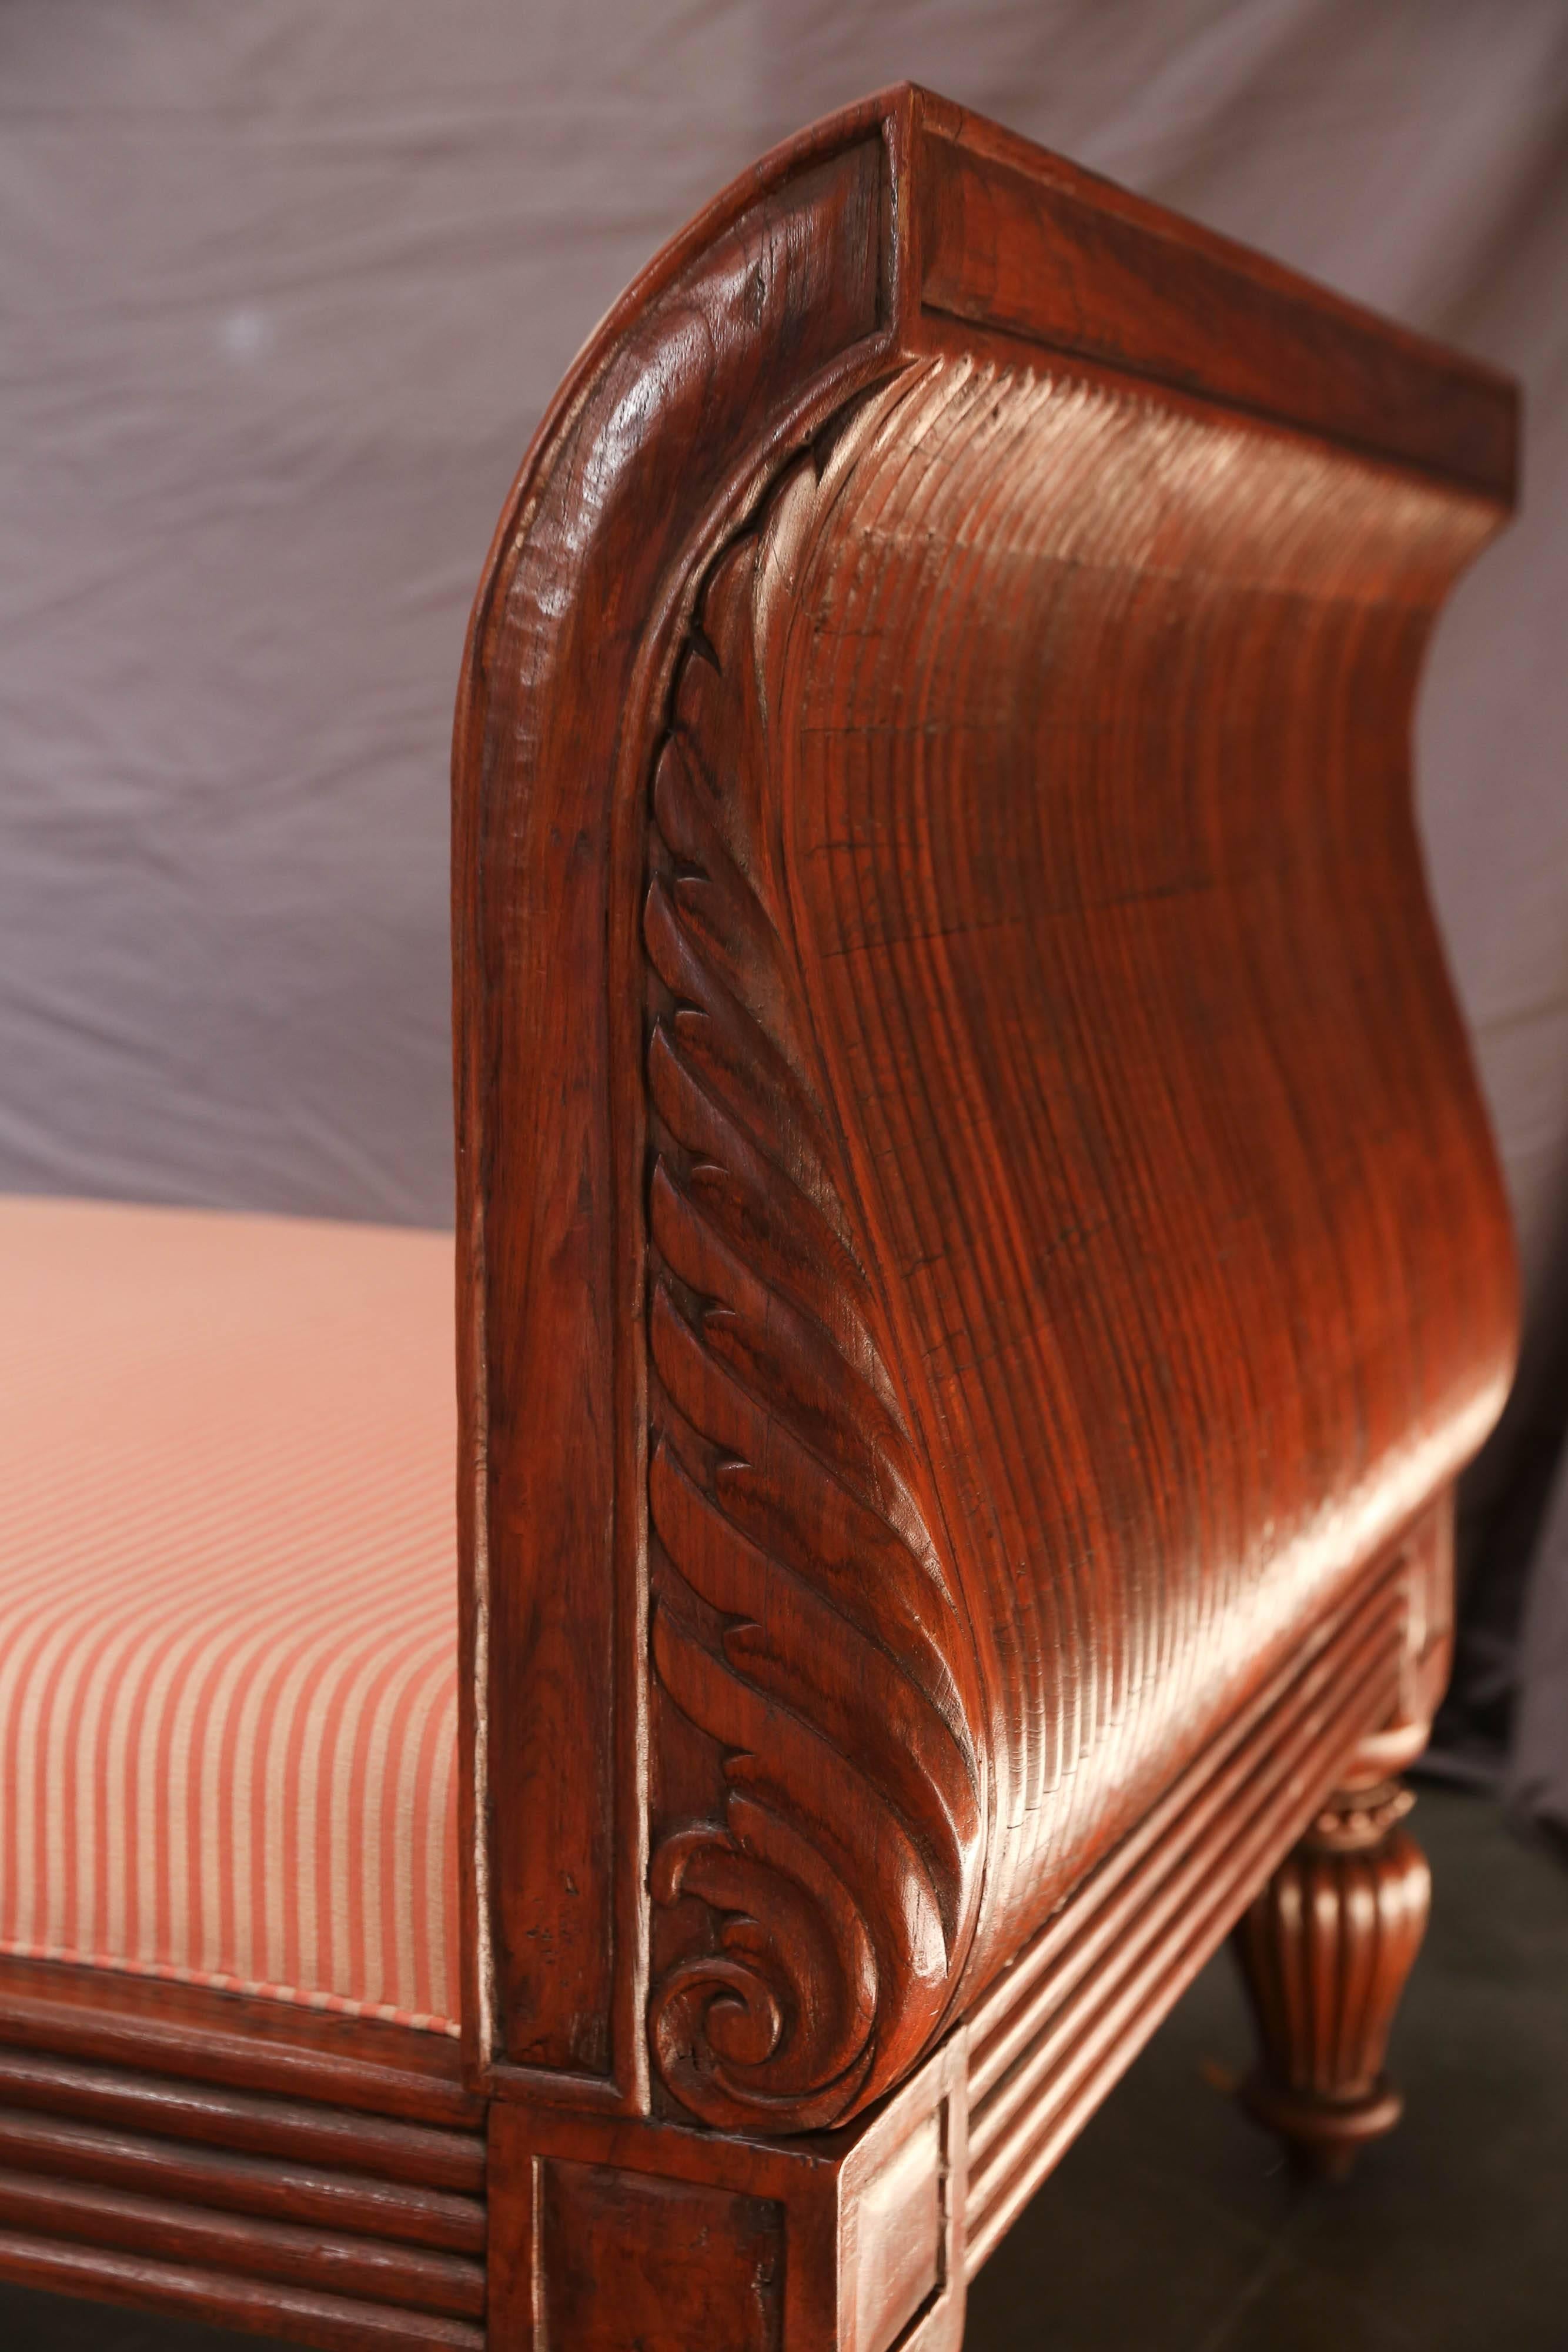 Solid Teak Wood Early 20th Century Upholstered Daybed from a Settler’s Home (Handgeschnitzt) im Angebot